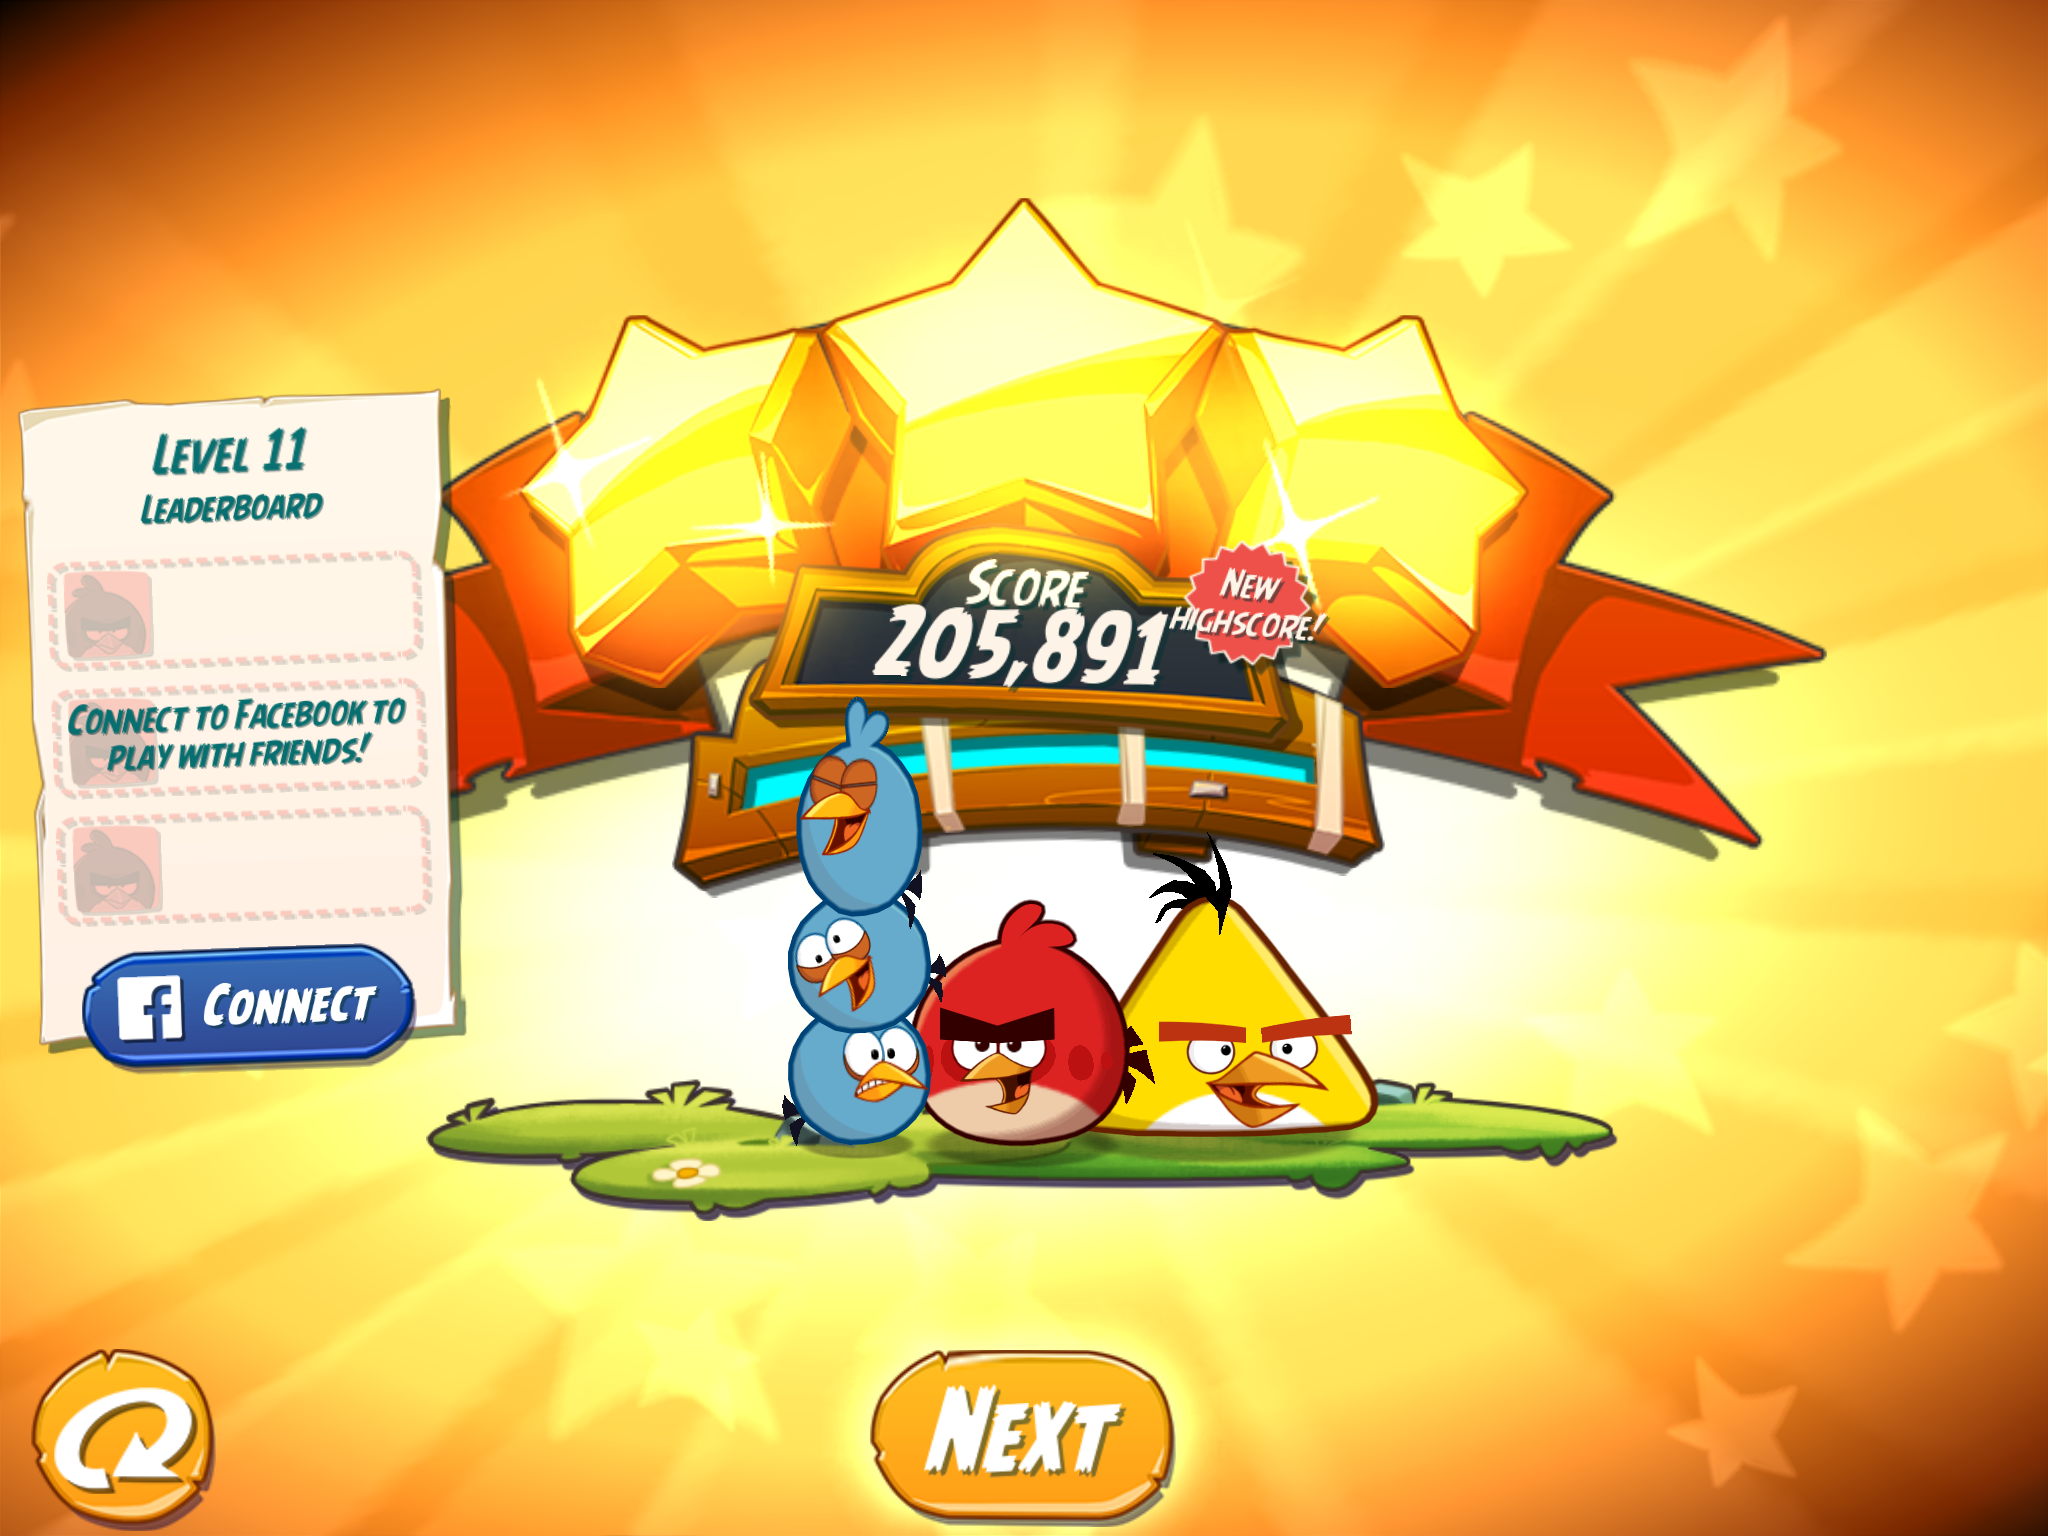 Spindy12: Angry Birds 2: Level 11 (iOS) 205,891 points on 2016-12-20 19:25:12